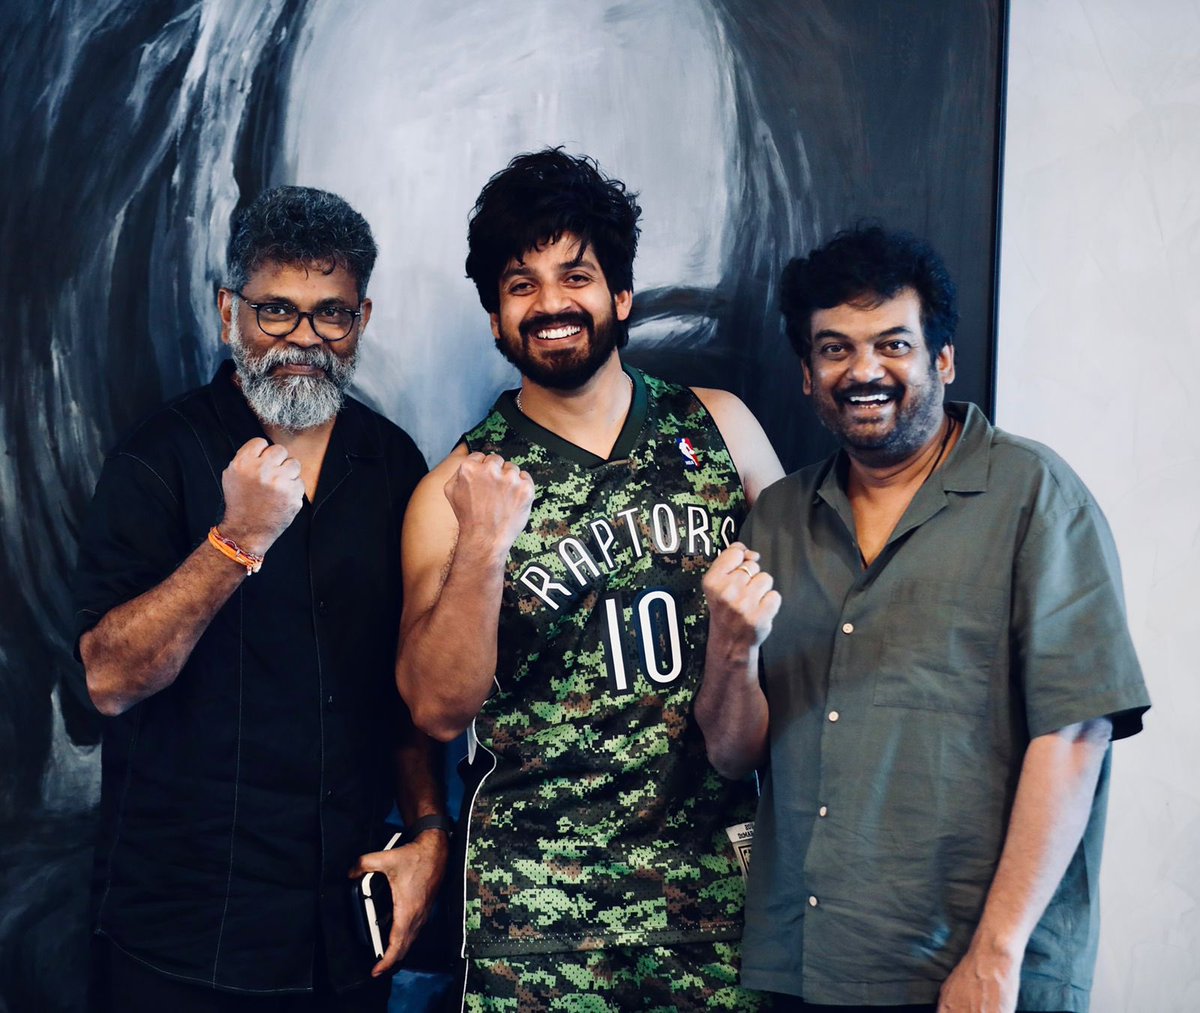 With the gurus @purijagan and @aryasukku What a energy and vibe 💫💫 #thankful #blessed #liger #pushpa